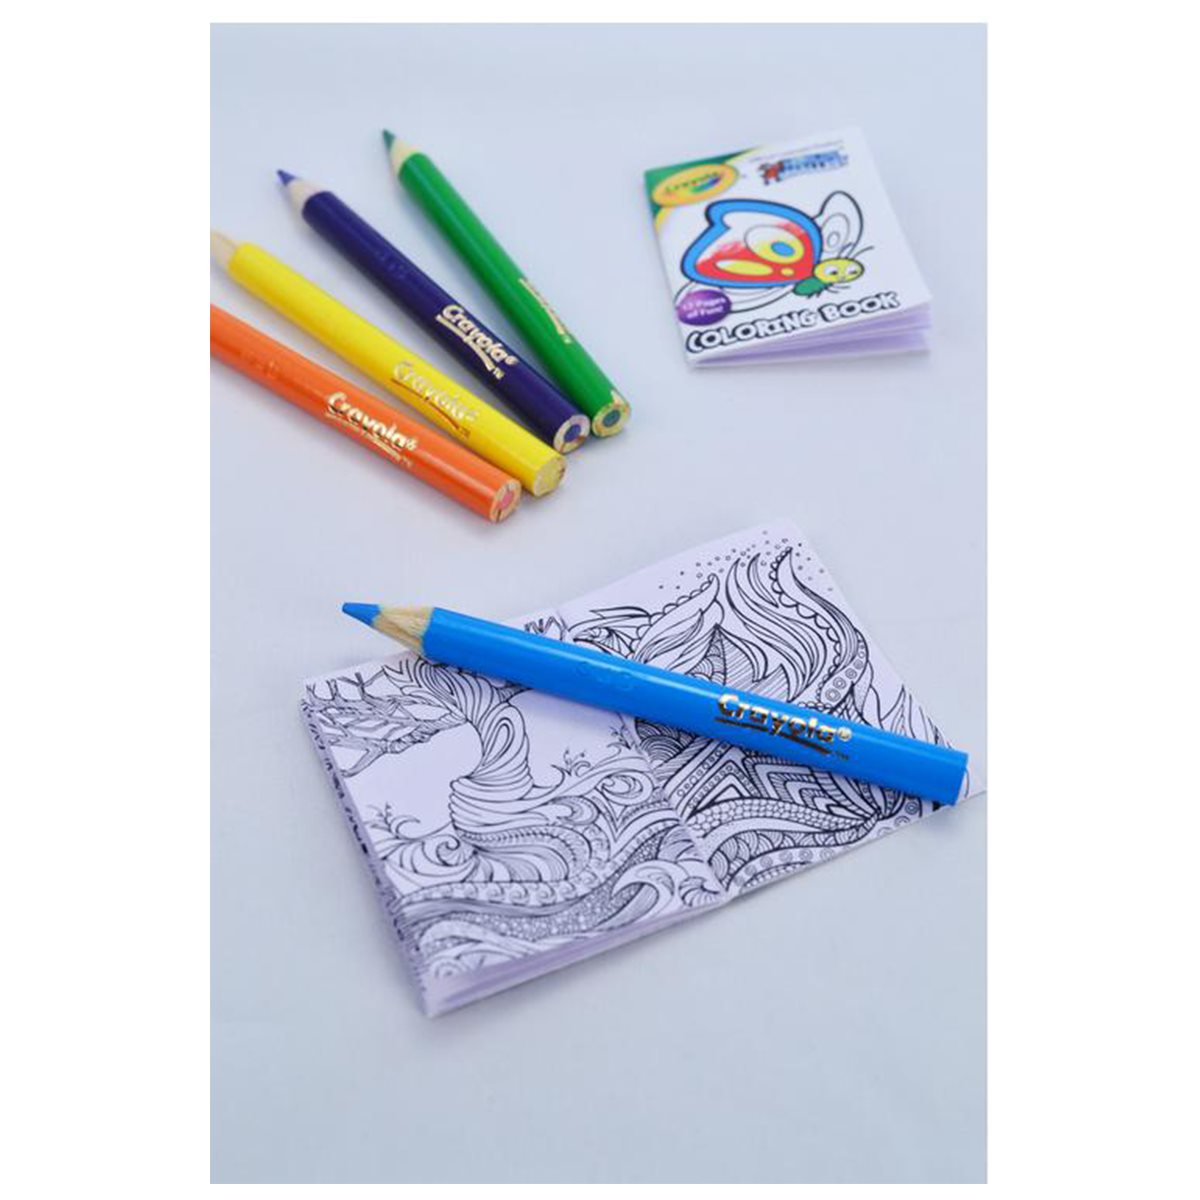 Deluxe 7 x 7 Adult Coloring Book & 8-Color Pencil Set | Plum Grove